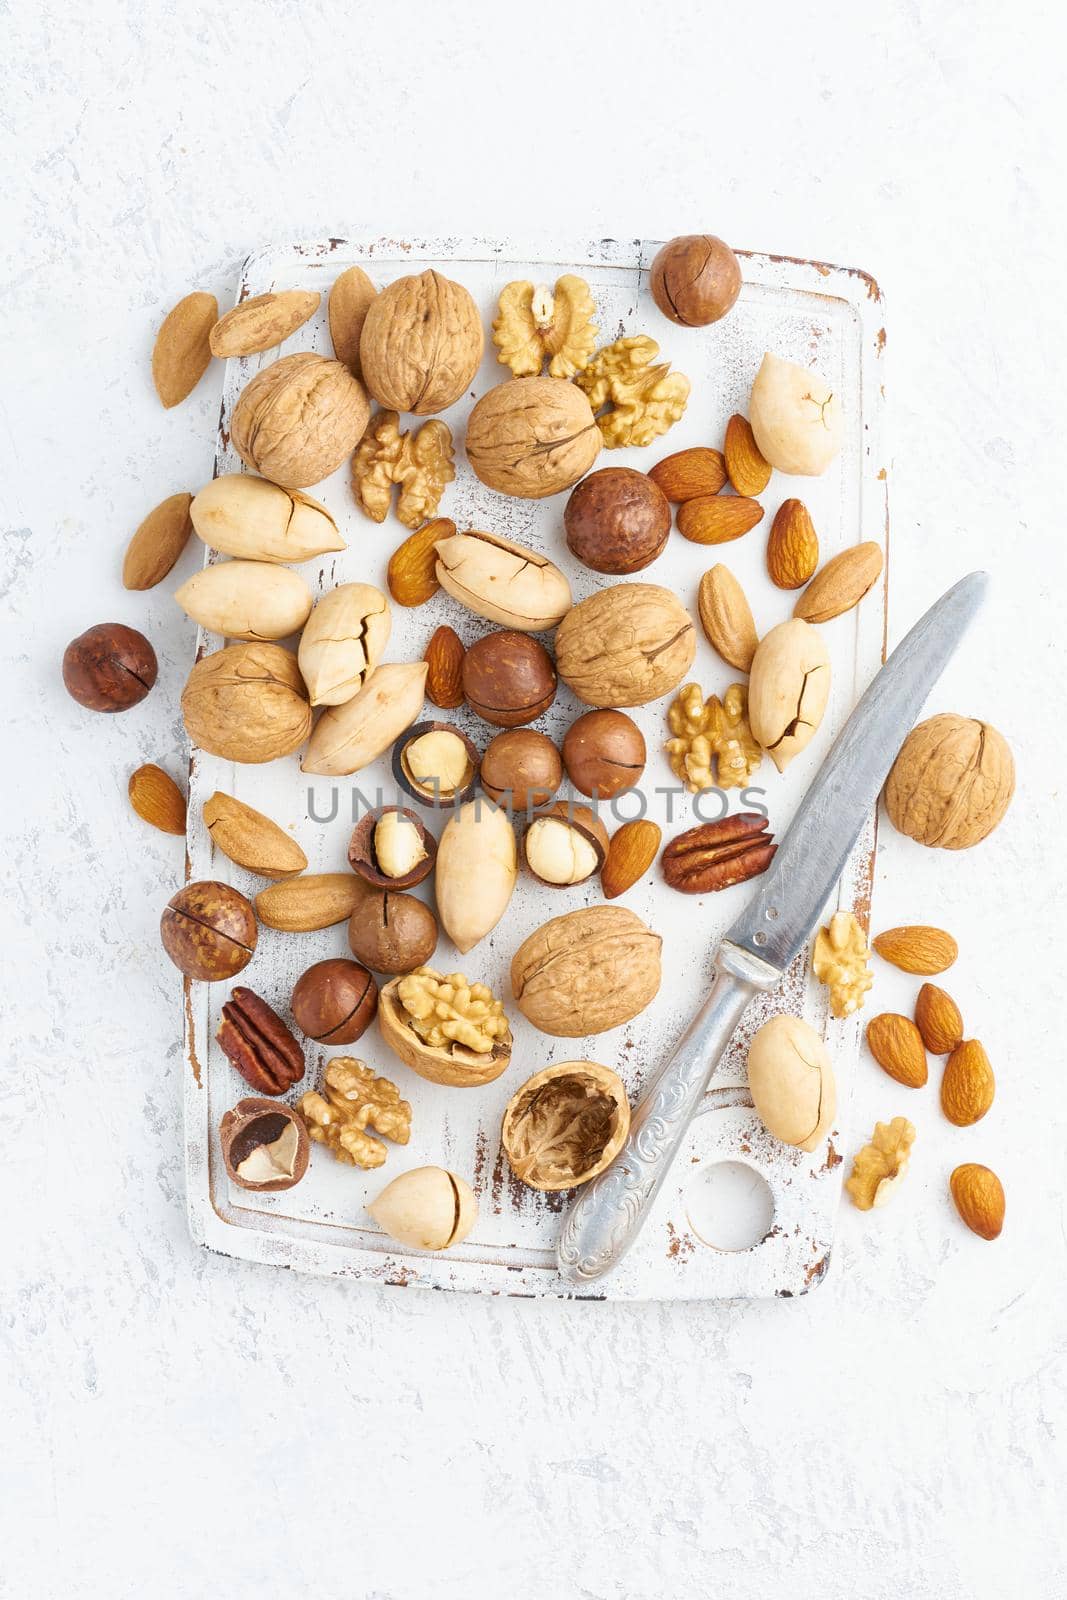 Mix of nuts - walnut, almonds, pecans, macadamia and knife for opening shell by NataBene